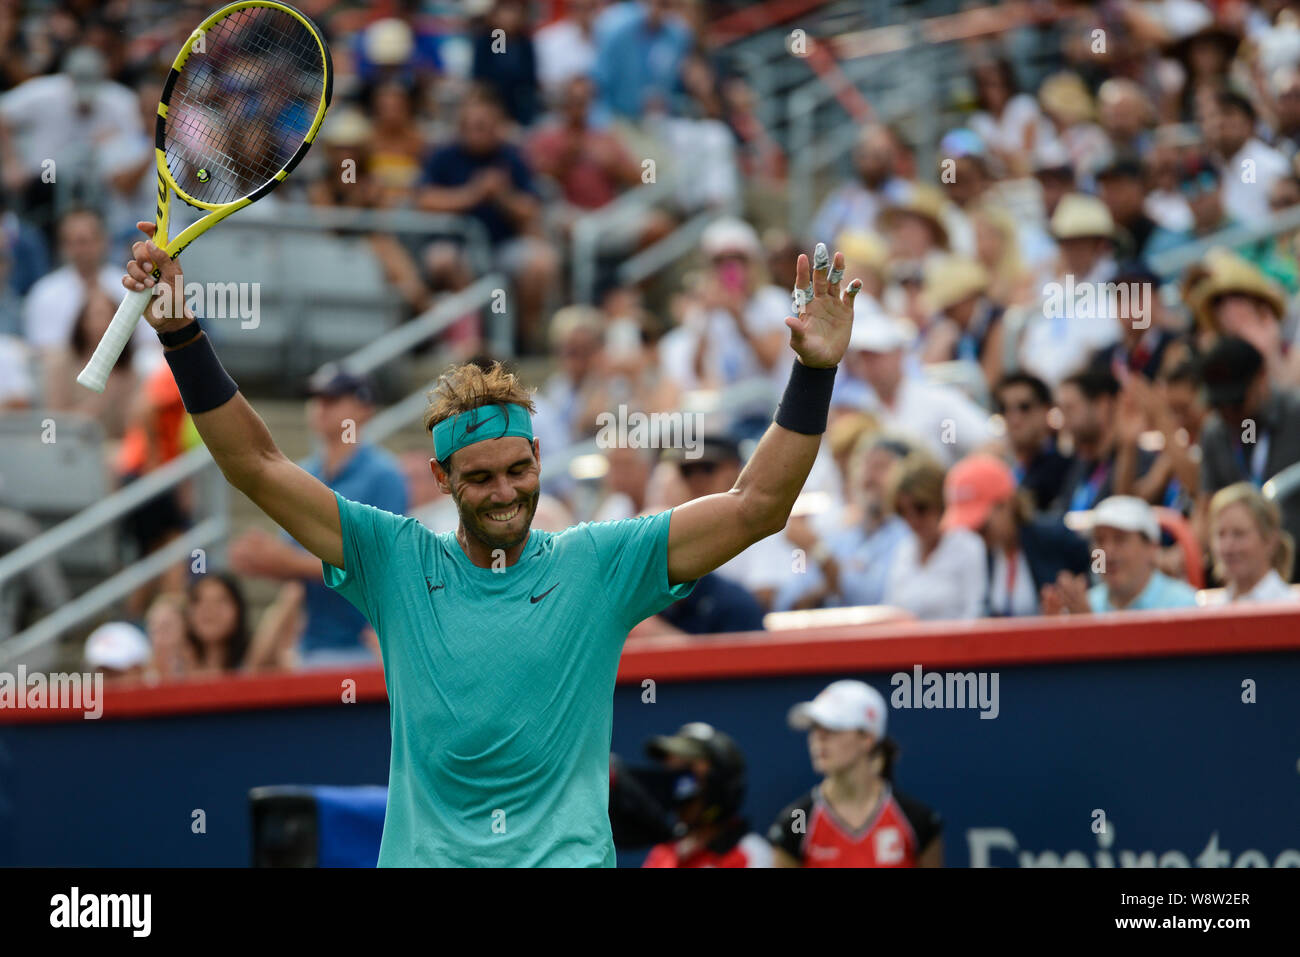 Montreal, Quebec, Canada. 11th Aug, 2019. RAFAEL NADAL of Spain celebrates  winning the Rogers Cup tennis tournament in Montreal Canada. Credit:  Christopher Levy/ZUMA Wire/Alamy Live News Stock Photo - Alamy